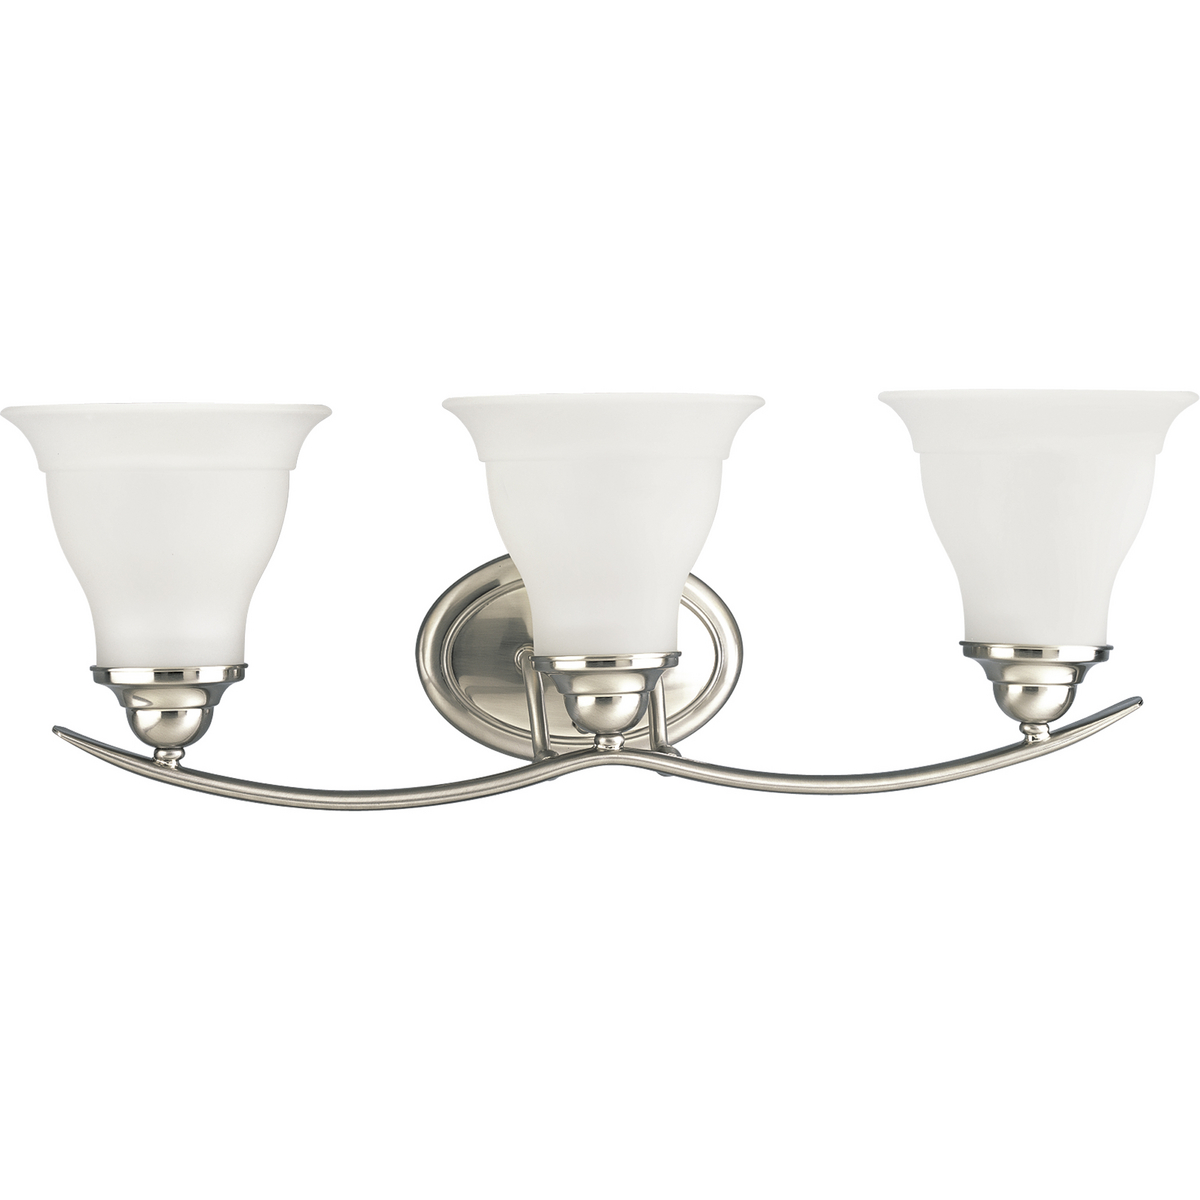 Three-light bath fixture featuring soft angles, curving lines and etched glass shades that mount up or down. Gracefully exotic, the Trinity Collection offers classic sophistication for transitional interiors. Sculptural forms of metal and glass are enhanced by a classic finish. This transitional style can transform a room or your whole home with its charming versatility. Brushed Nickel finish.